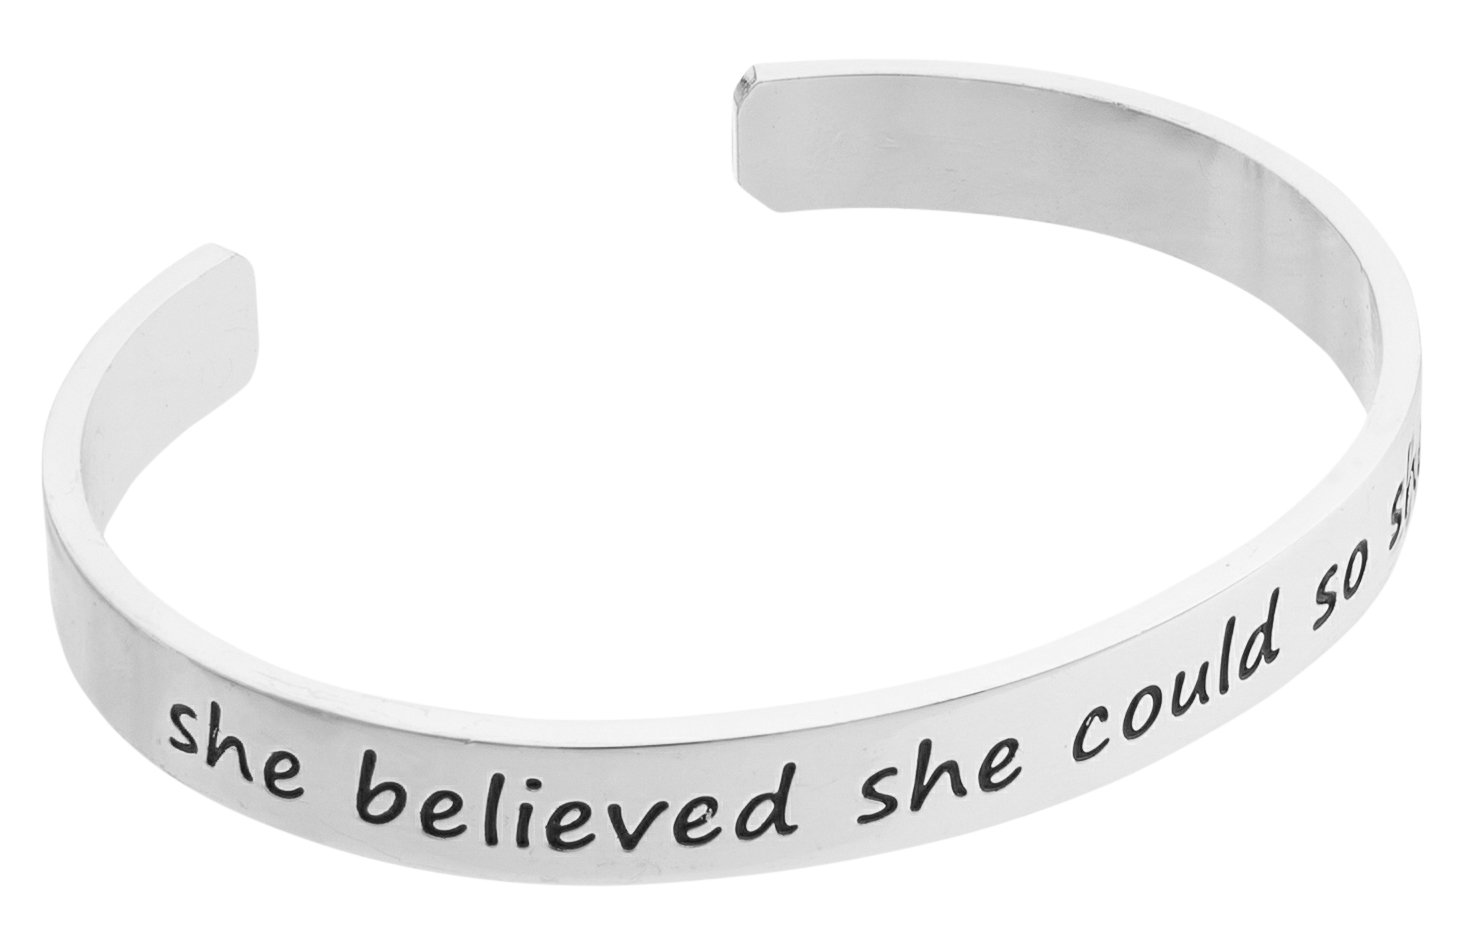 Inspirational Silver Cuff Bracelet – Stamped “She Believed She Could So She Did” Jewelry for Women, Teens, Girls – Motivational Quotes Mantra Band Bracelets – Perfect Gift